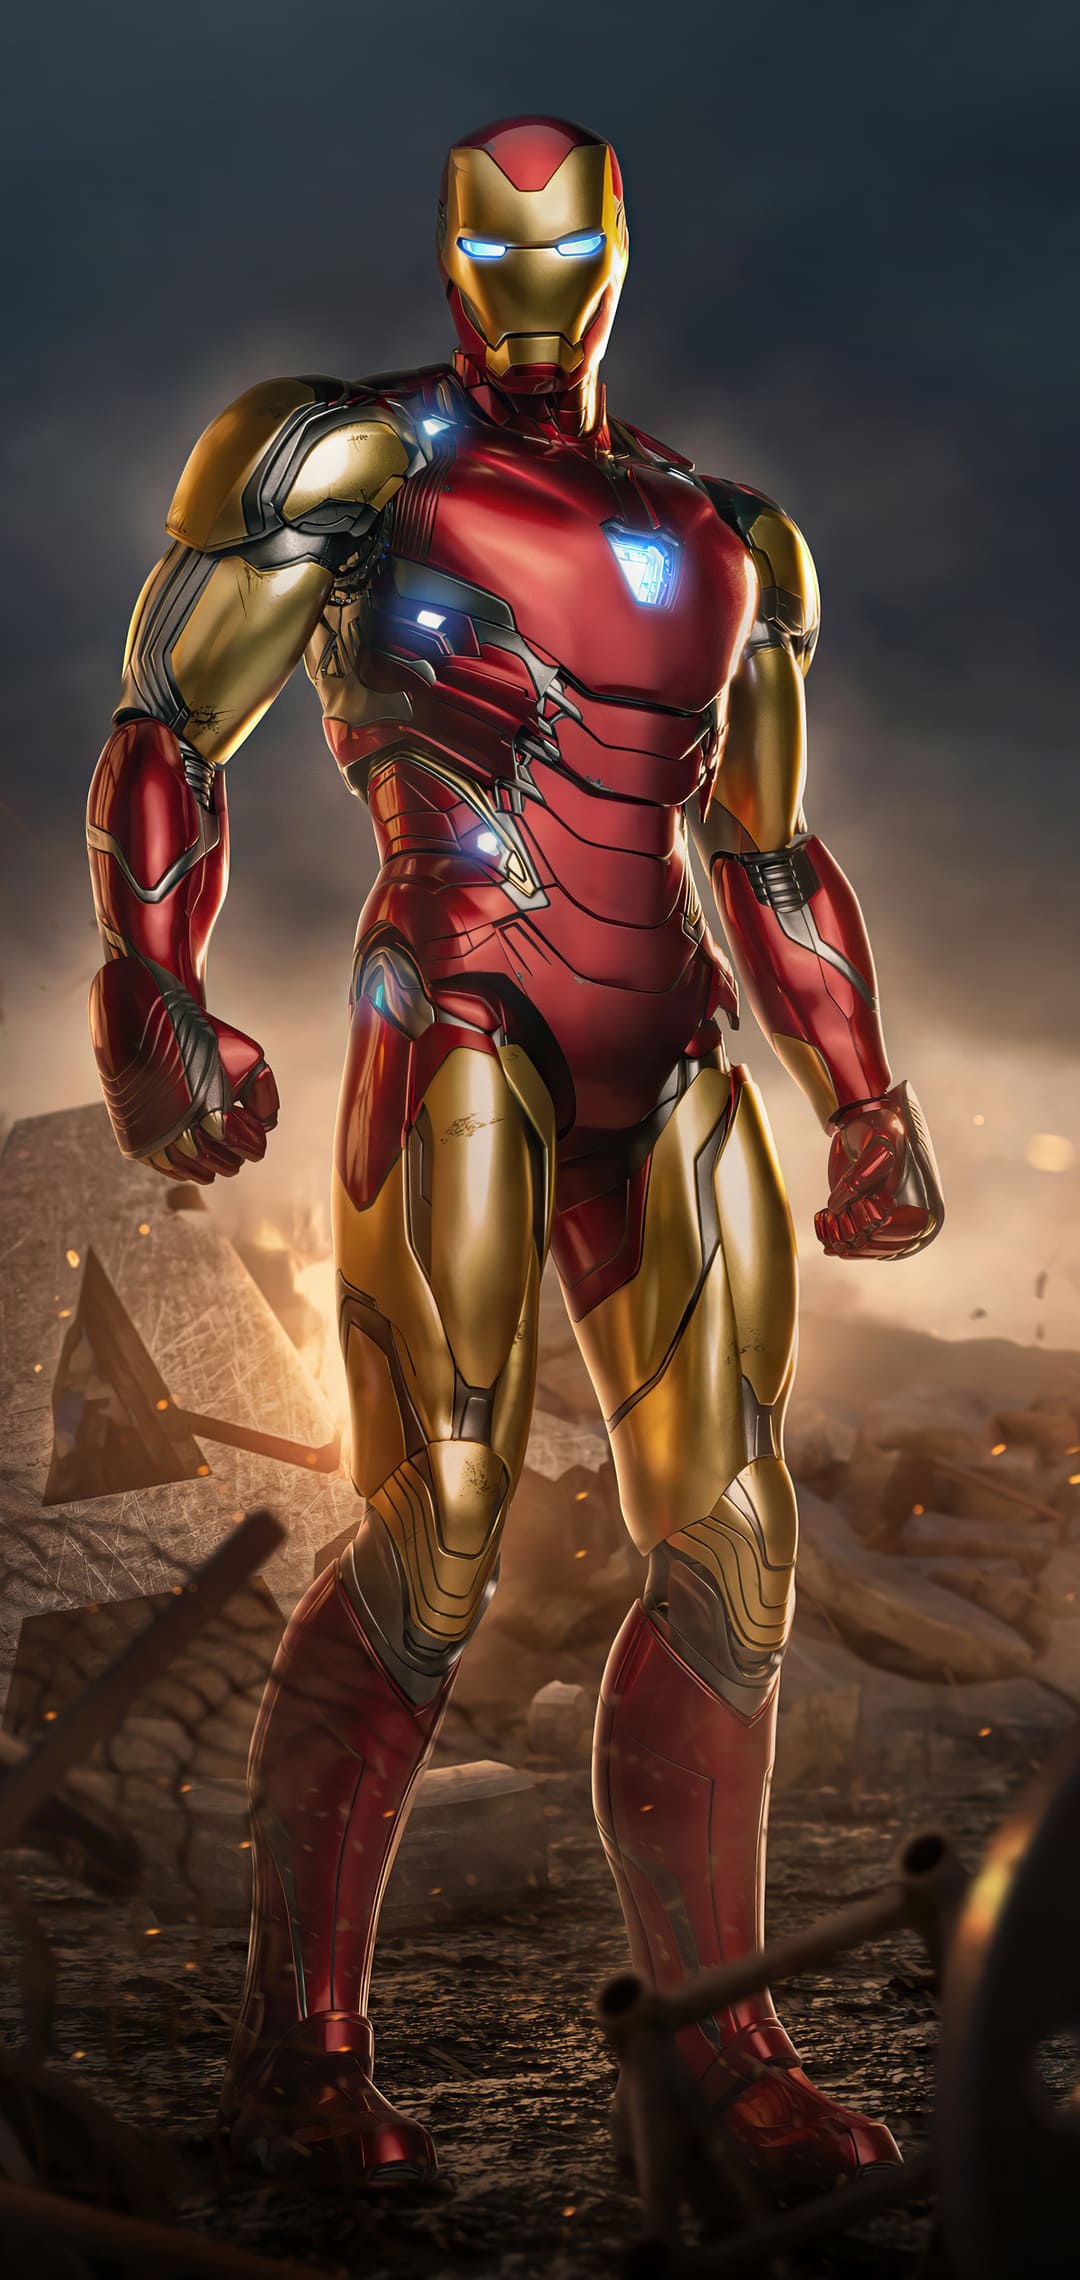 Iron Man, Free wallpaper download, Android friendly, Marvel hero, 1080x2280 HD Phone